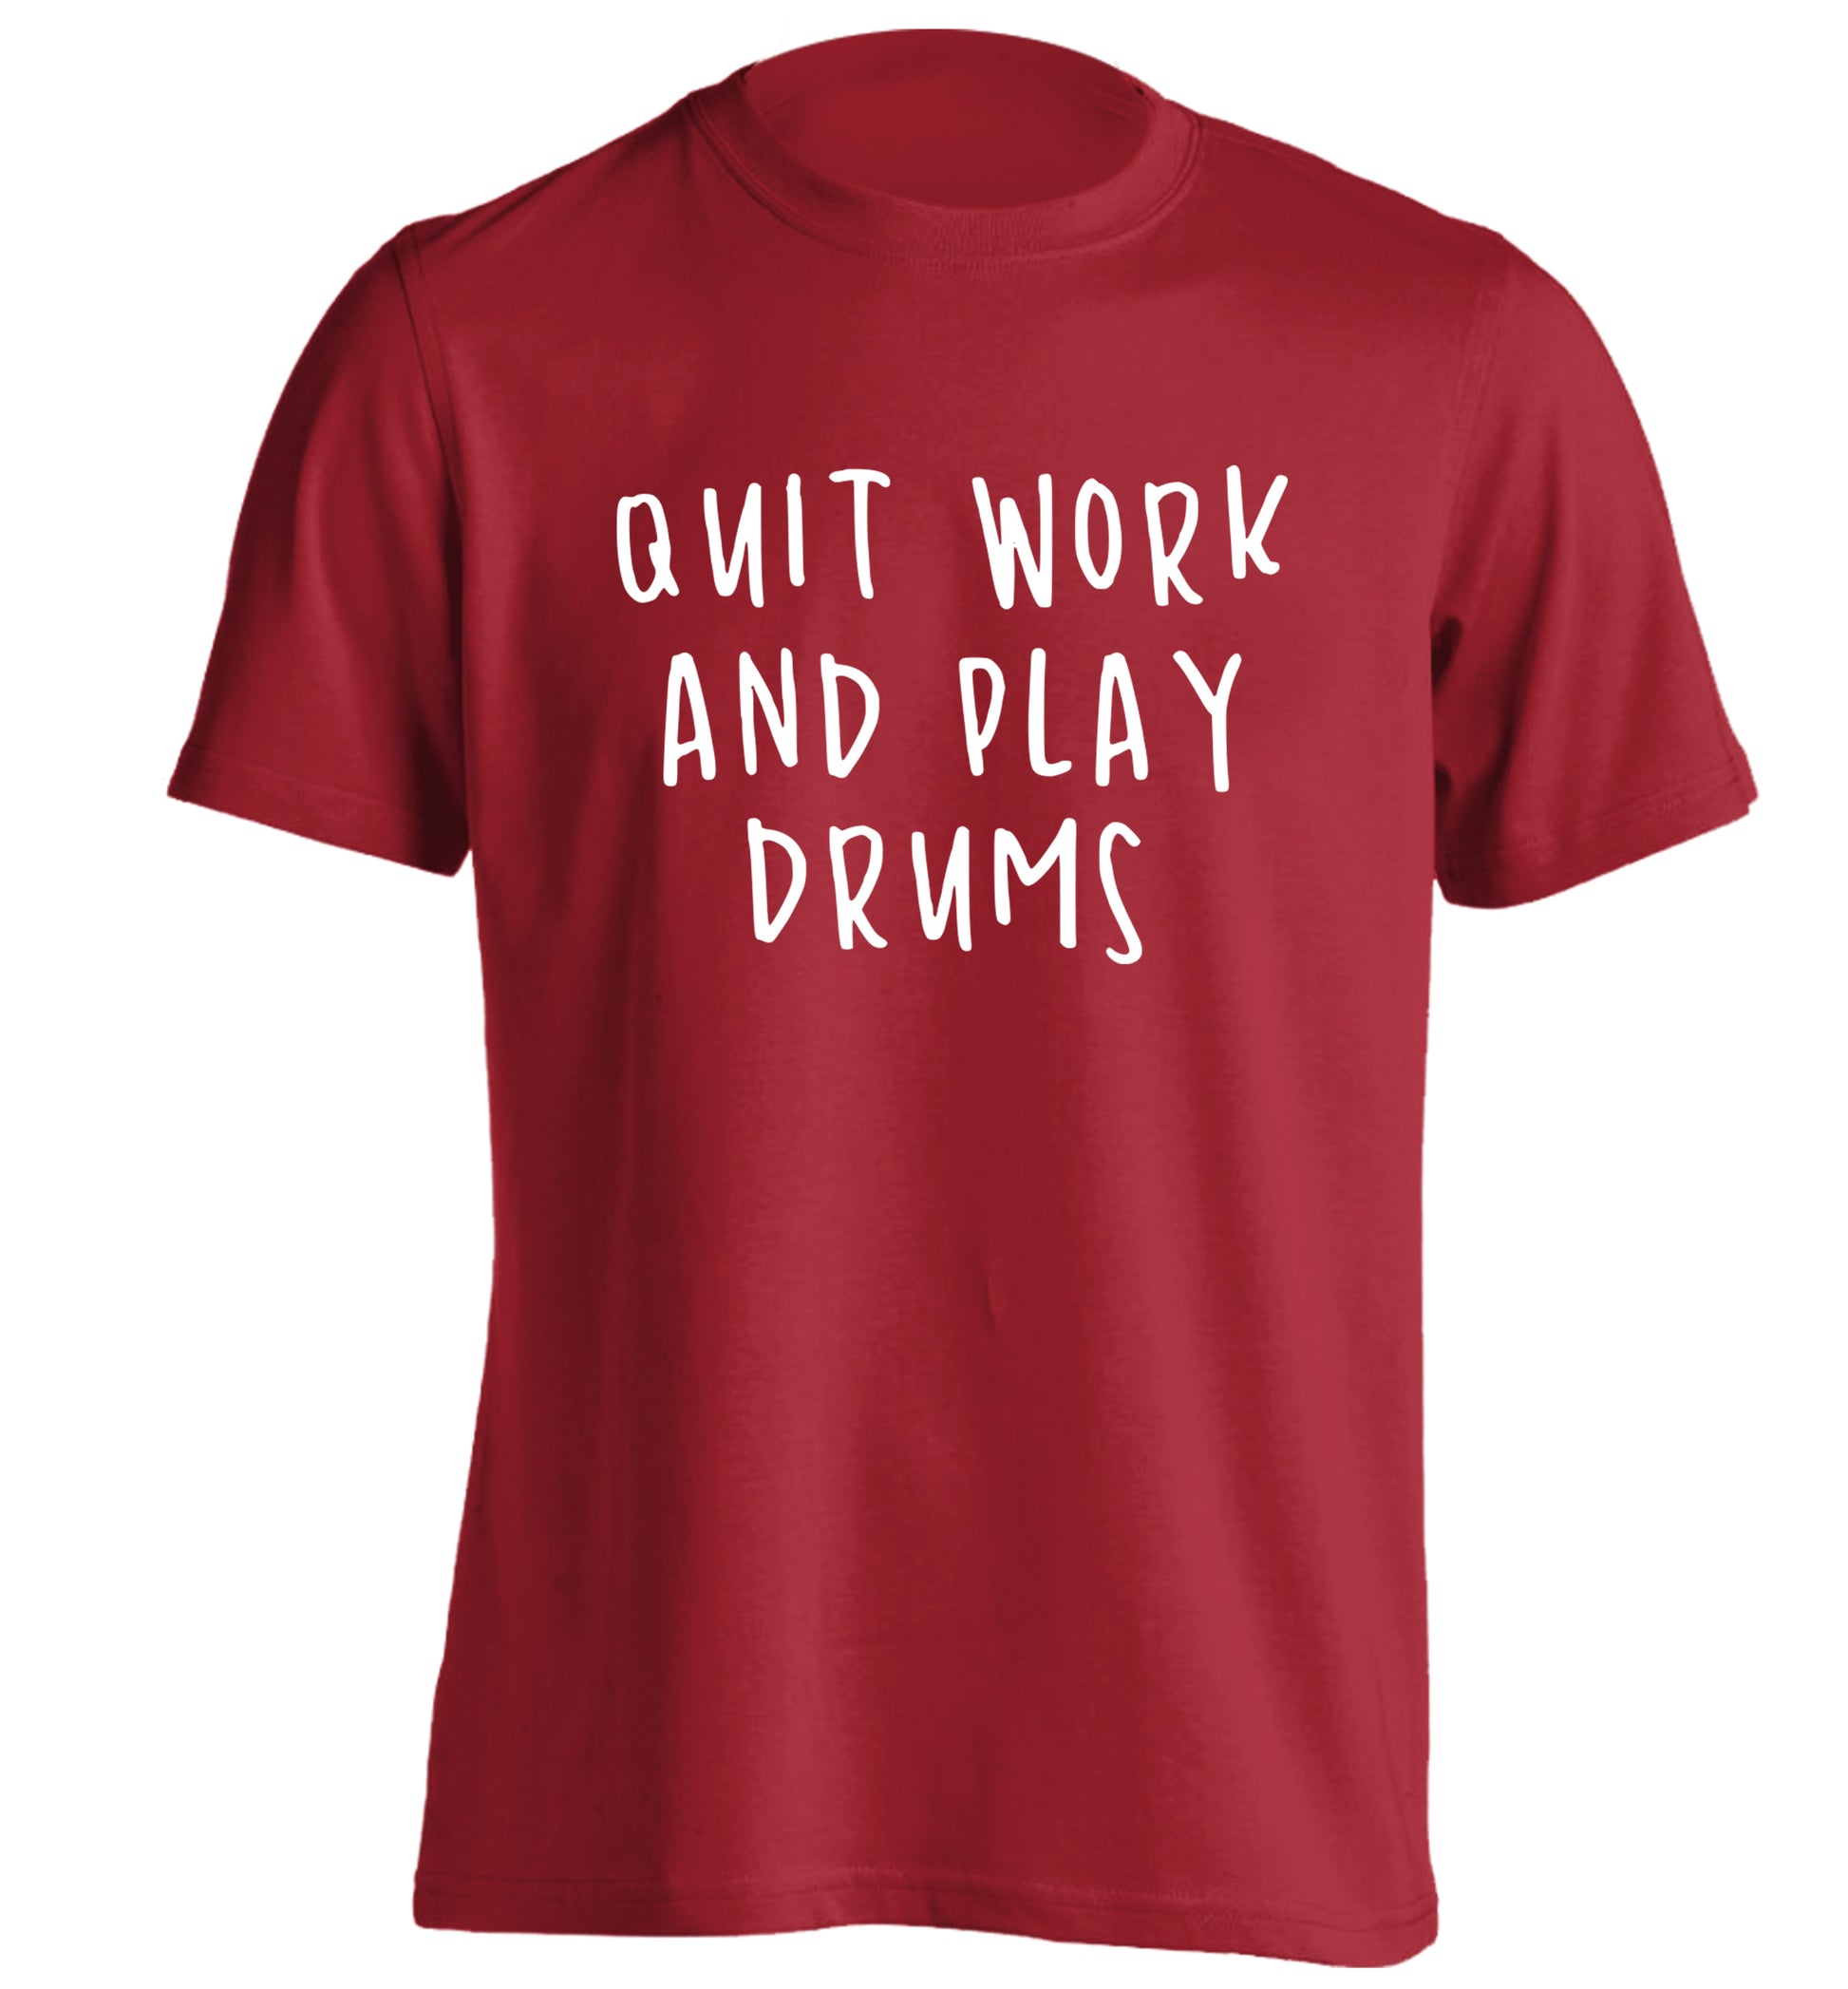 Quit work and play drums adults unisex red Tshirt 2XL